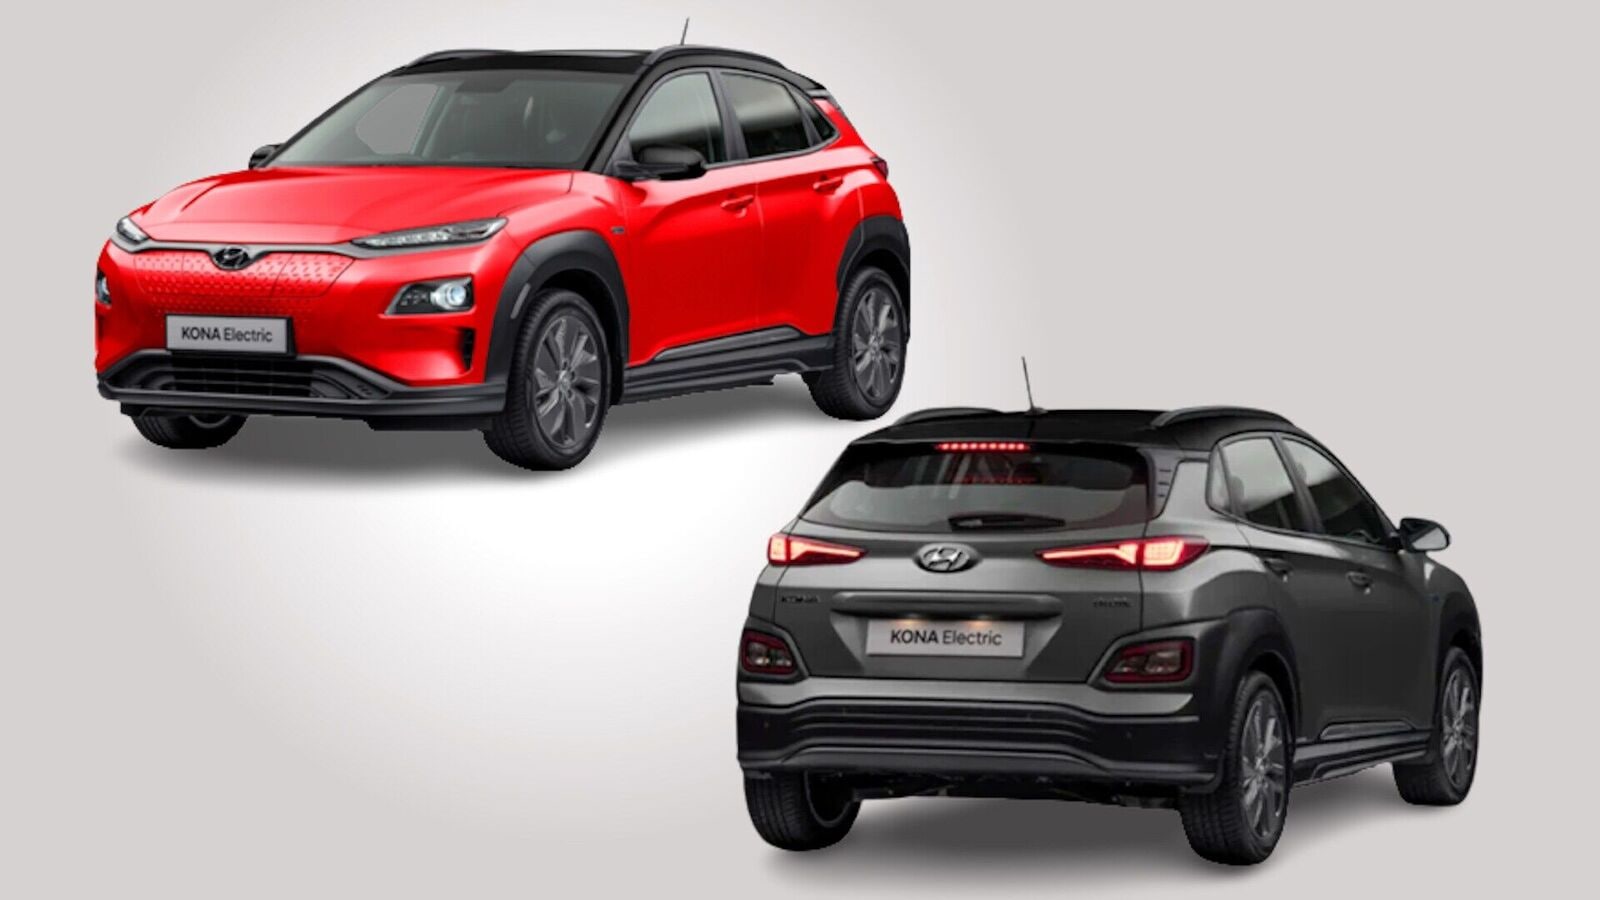 Hyundai Kona electric SUV gets two new colour options in India